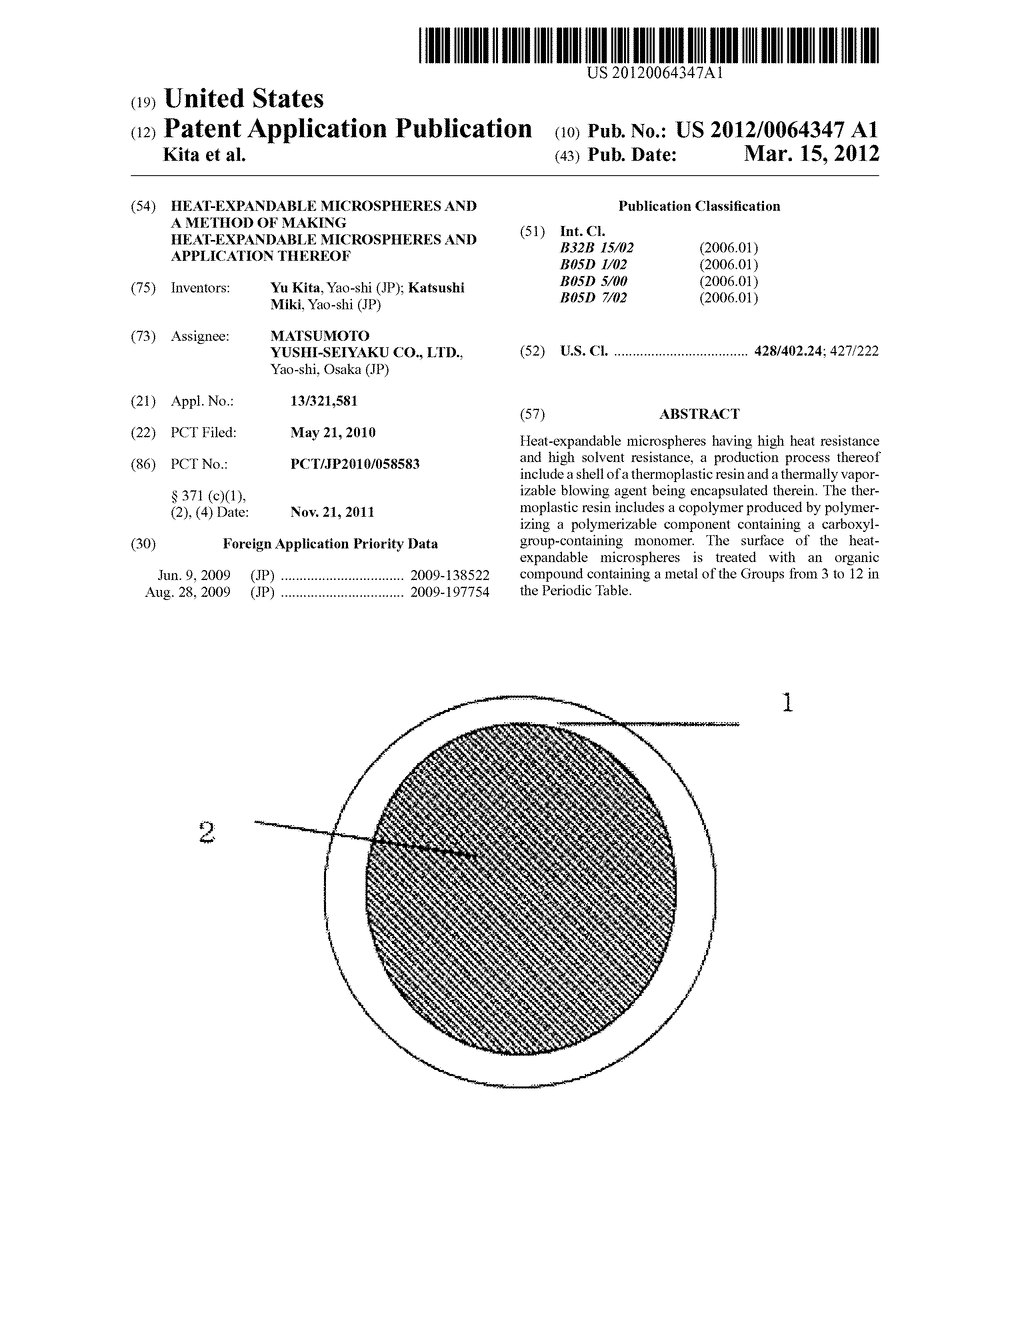 HEAT-EXPANDABLE MICROSPHERES AND A METHOD OF MAKING HEAT-EXPANDABLE     MICROSPHERES AND APPLICATION THEREOF - diagram, schematic, and image 01